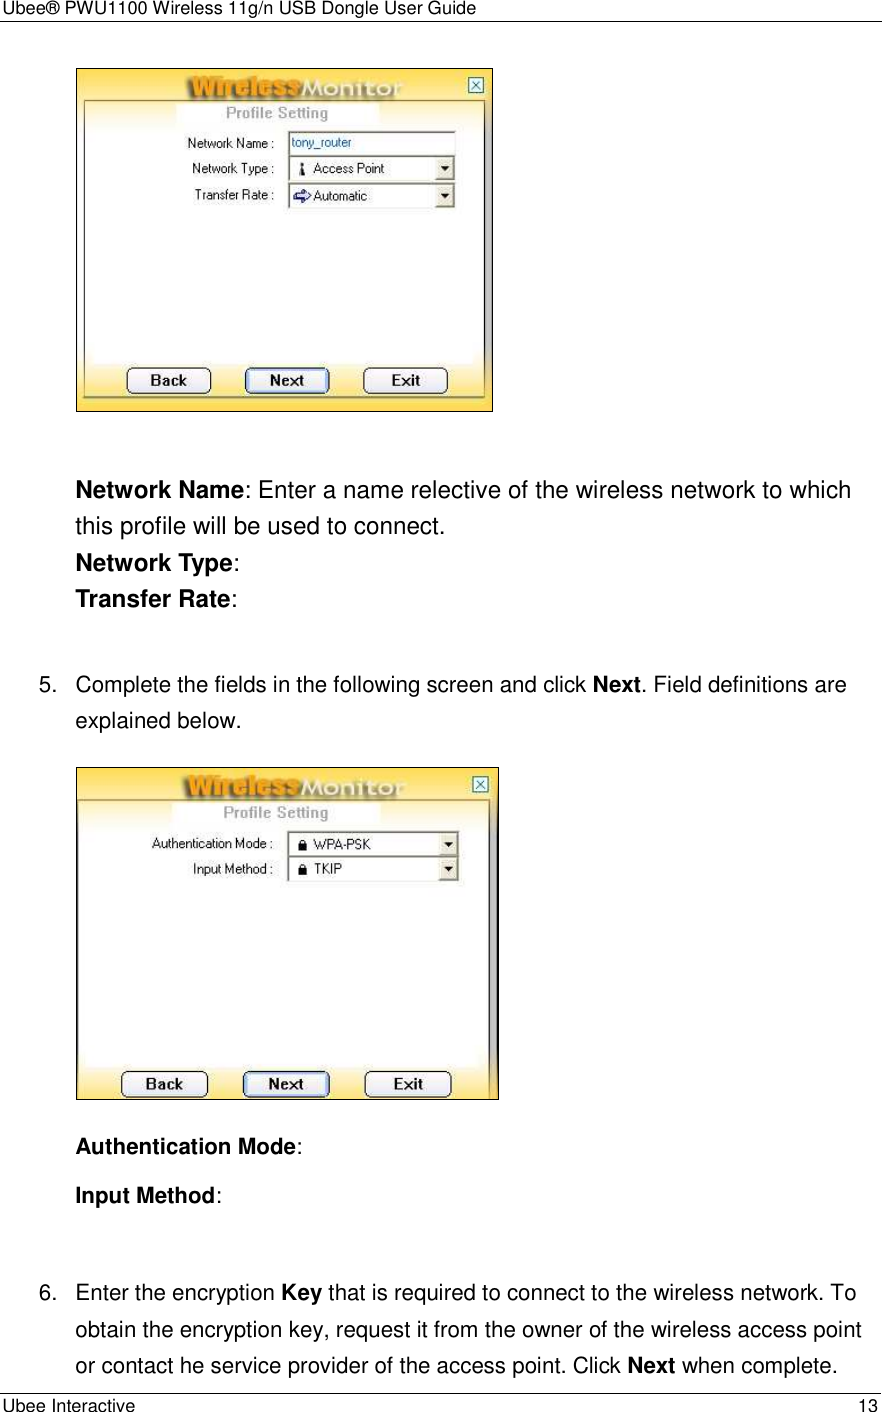 Ubee® PWU1100 Wireless 11g/n USB Dongle User Guide Ubee Interactive    13   Network Name: Enter a name relective of the wireless network to which this profile will be used to connect. Network Type:   Transfer Rate:    5.  Complete the fields in the following screen and click Next. Field definitions are explained below.    Authentication Mode: Input Method:  6.  Enter the encryption Key that is required to connect to the wireless network. To obtain the encryption key, request it from the owner of the wireless access point or contact he service provider of the access point. Click Next when complete. 